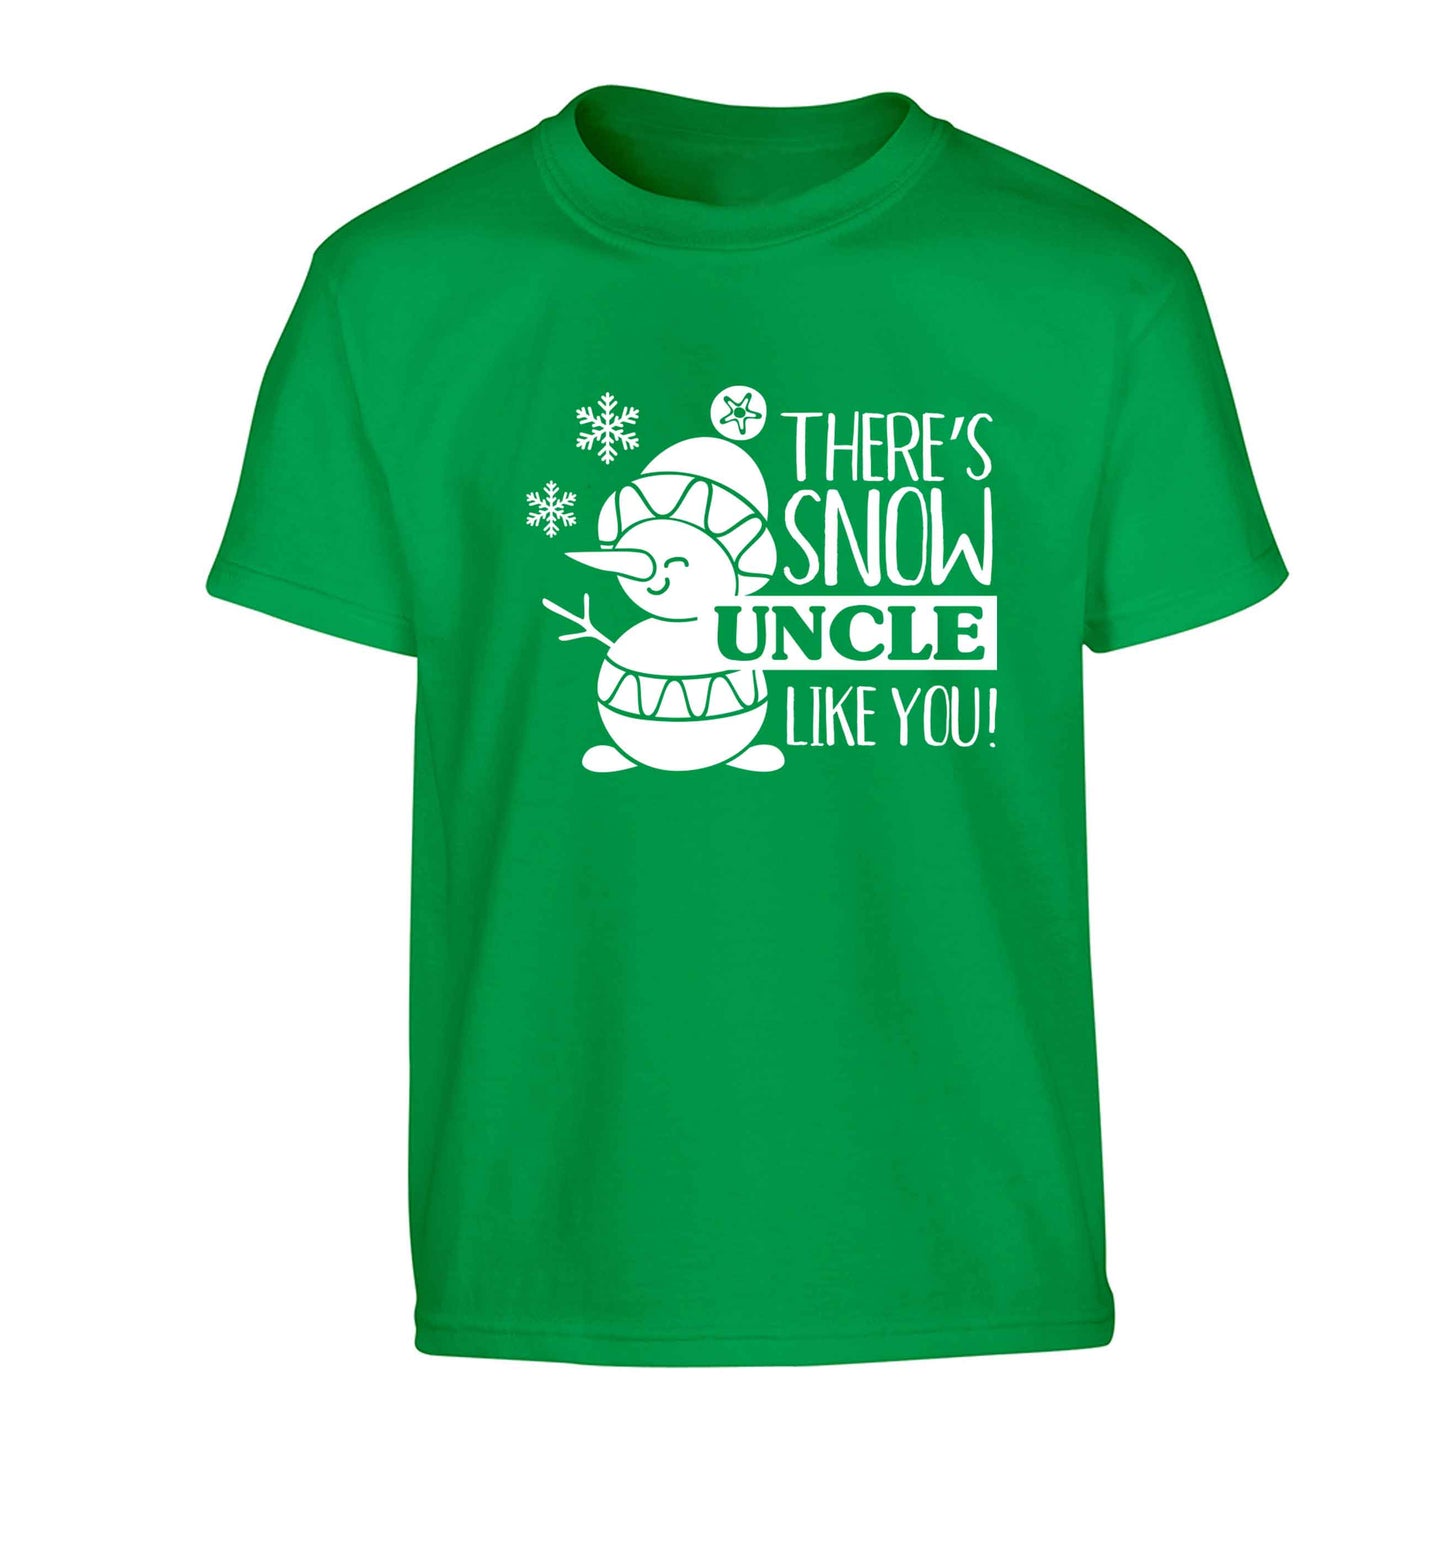 There's snow uncle like you Children's green Tshirt 12-13 Years